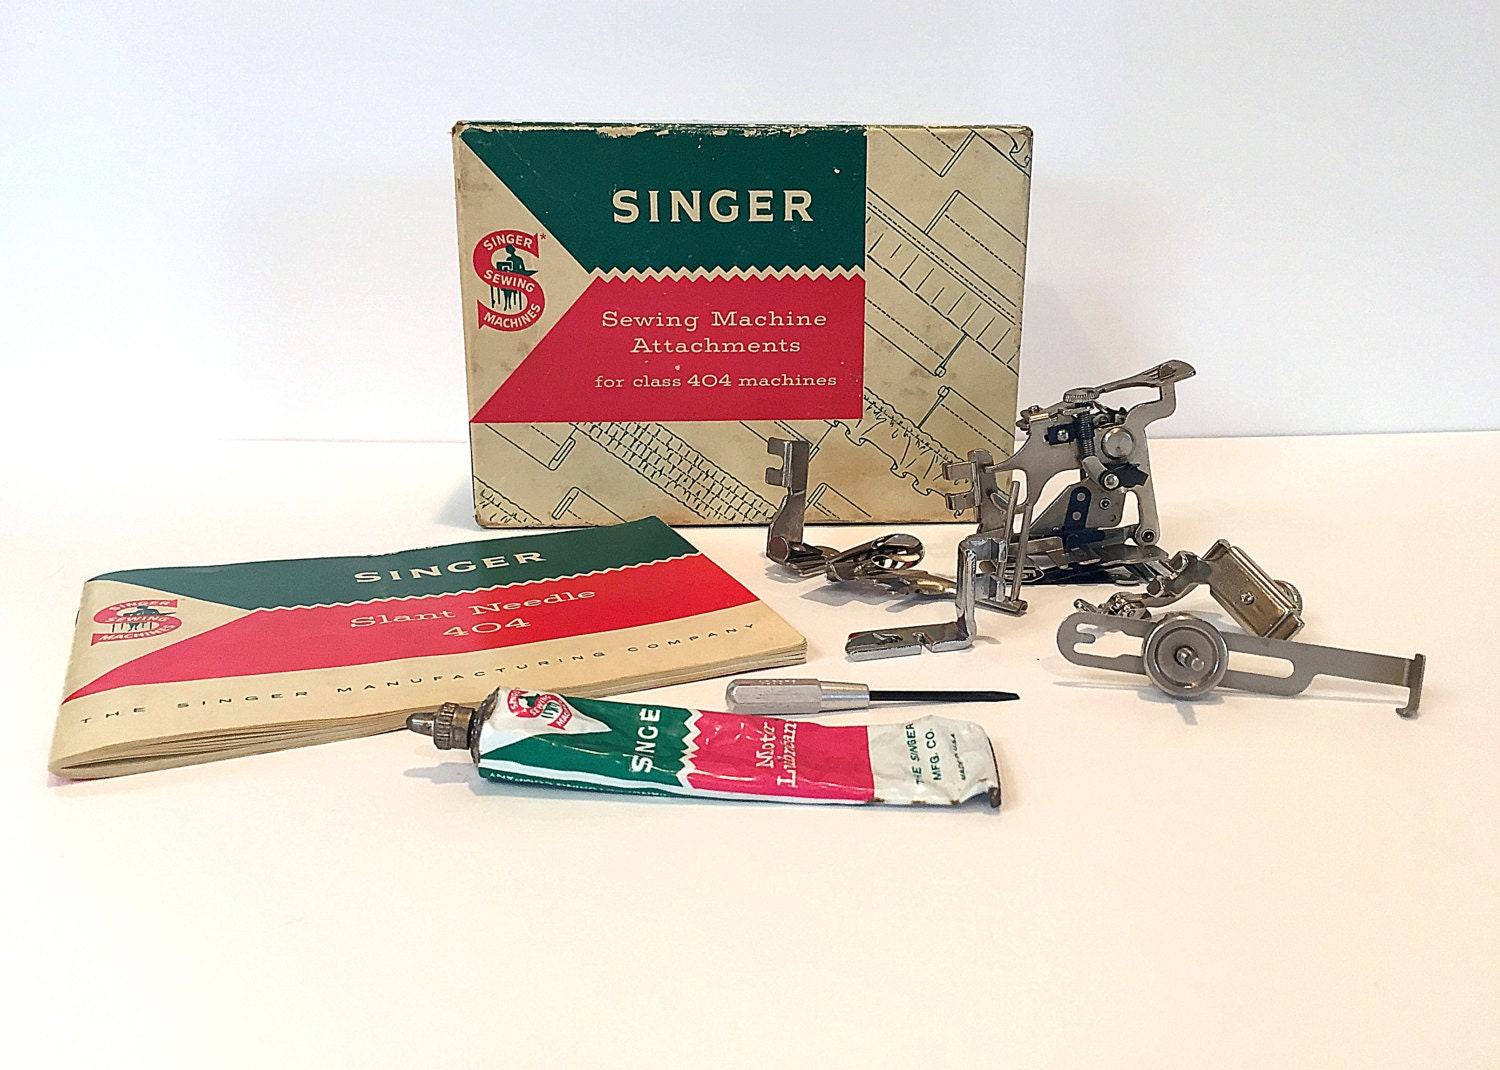 singer sewing machine attachments manual